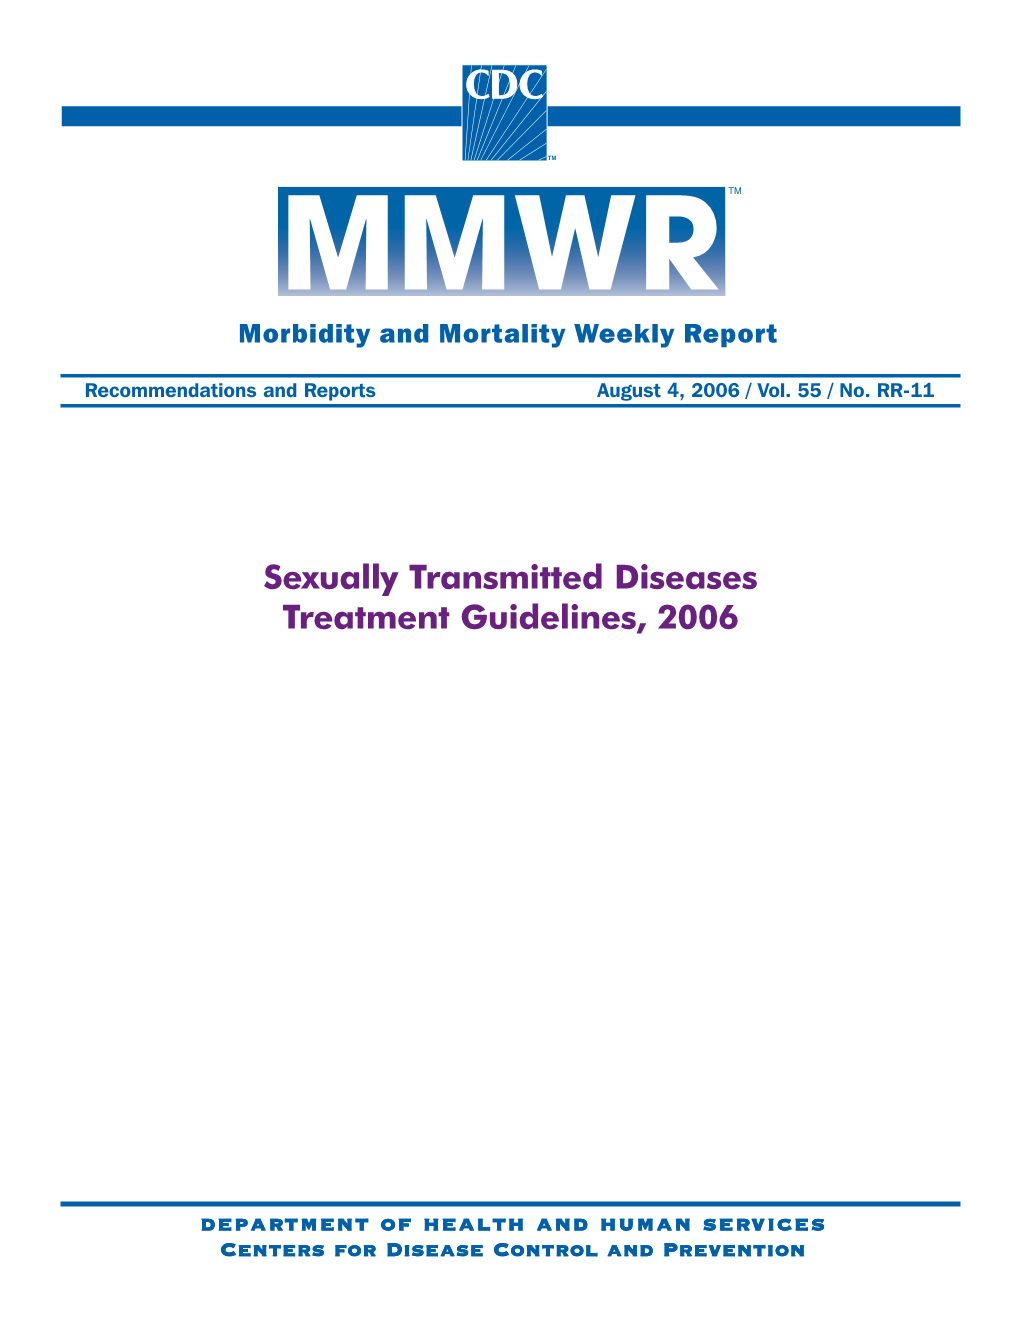 Sexually Transmitted Diseases Treatment Guidelines, 2006